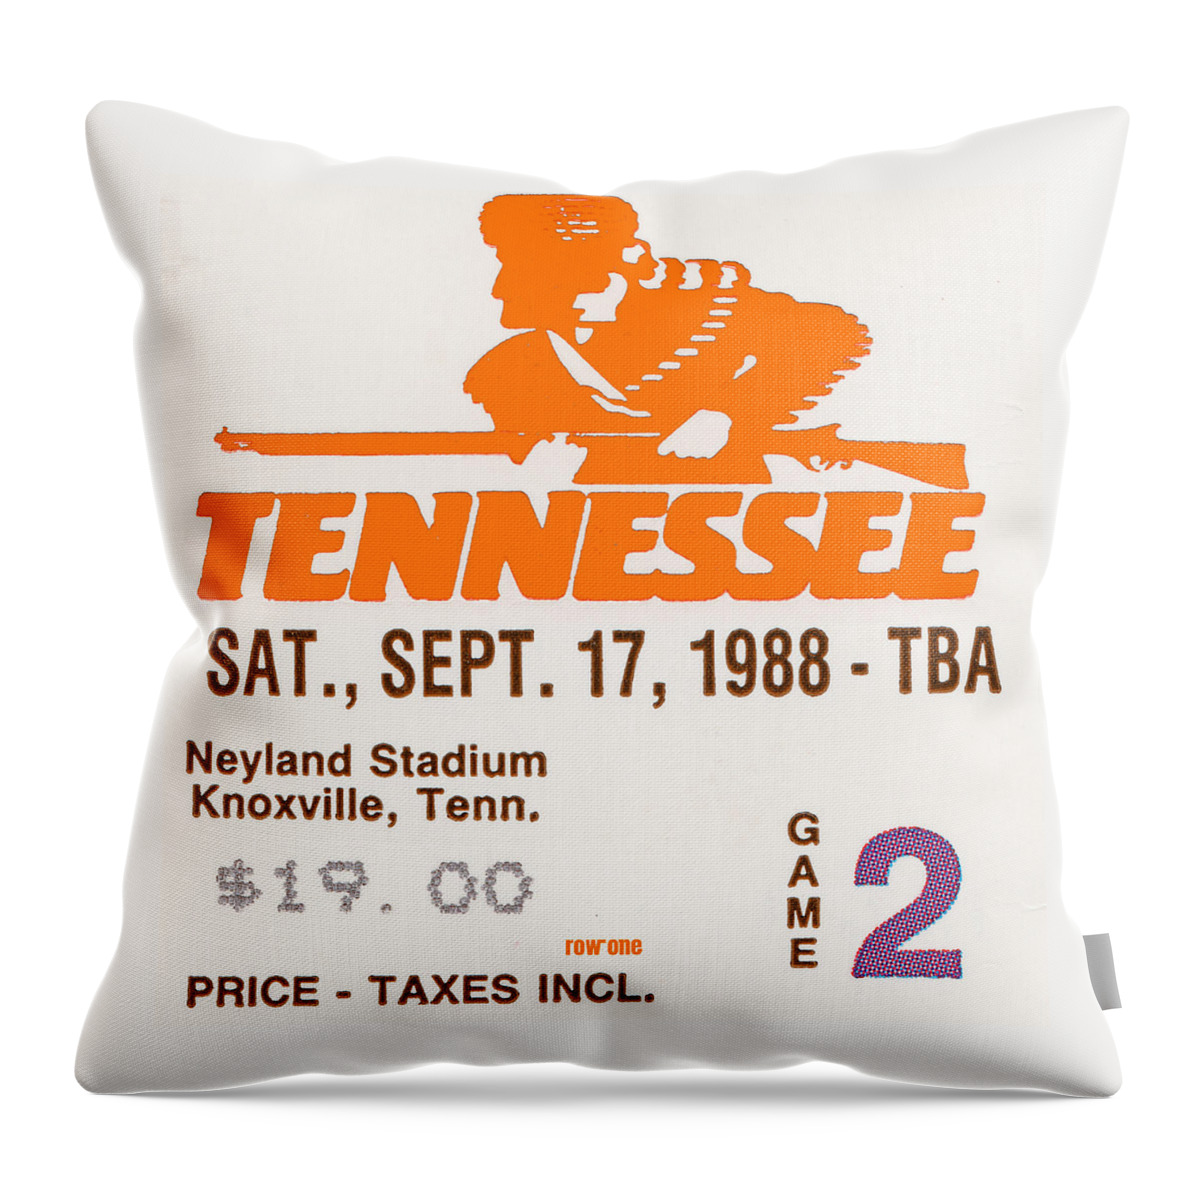 Lsu Throw Pillow featuring the mixed media 1988 Tennessee vs. LSU by Row One Brand